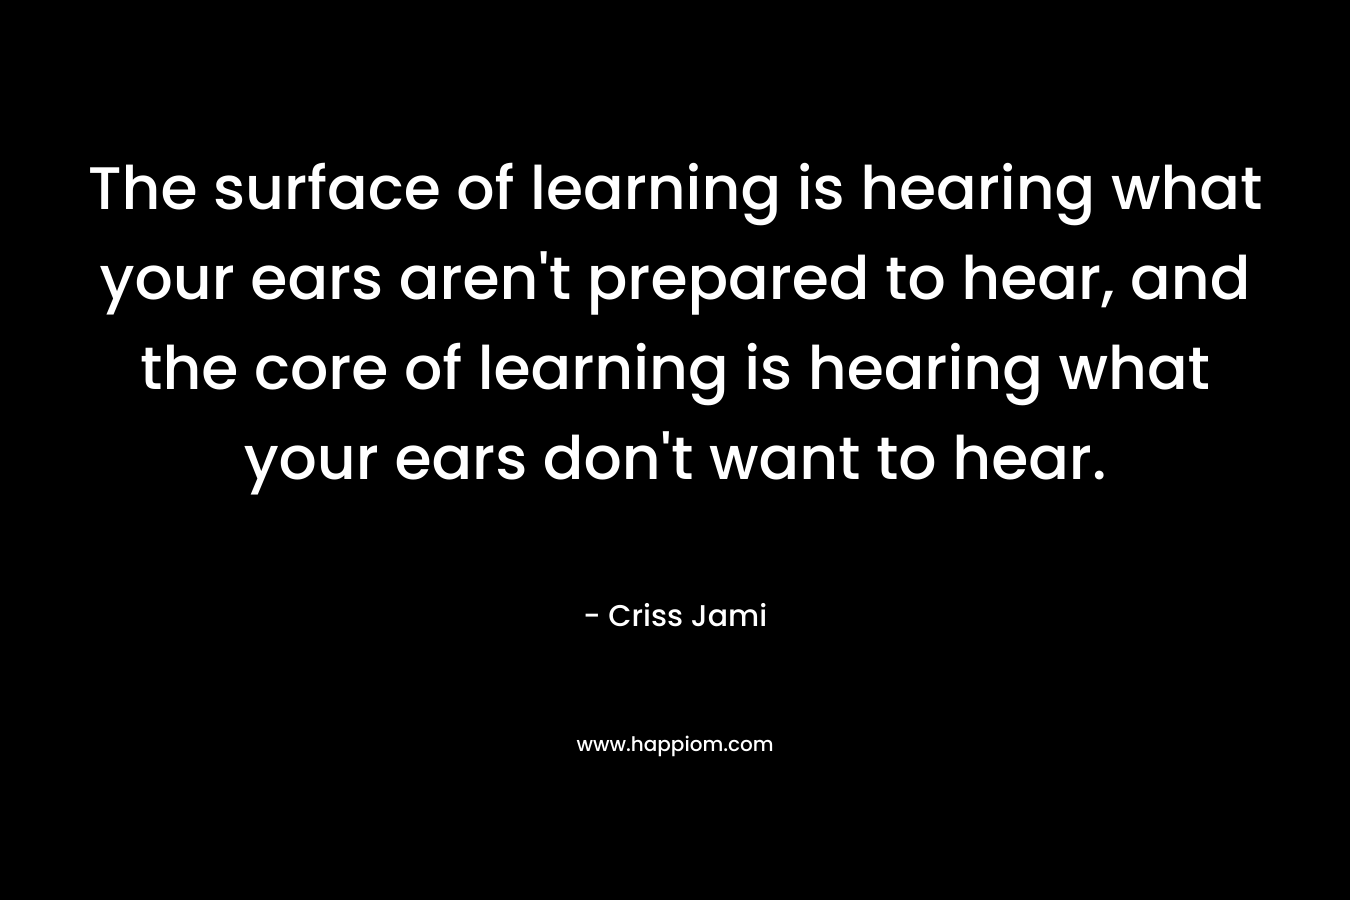 The surface of learning is hearing what your ears aren't prepared to hear, and the core of learning is hearing what your ears don't want to hear.